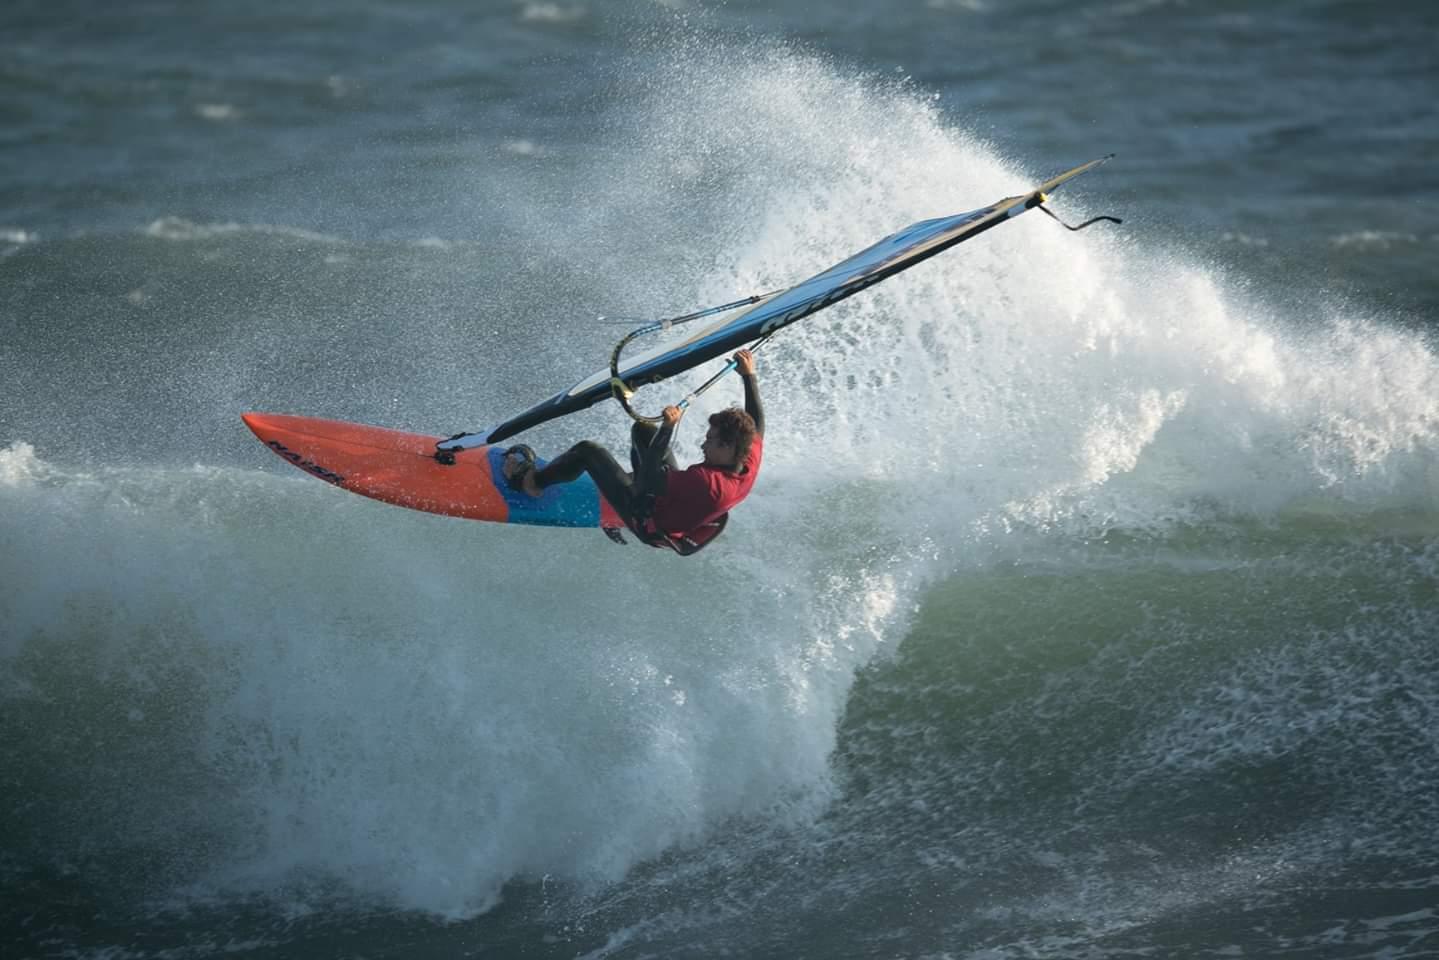 Bernd Roediger Opens 2019 IWT with Podium Finish in Japan - Naish.com